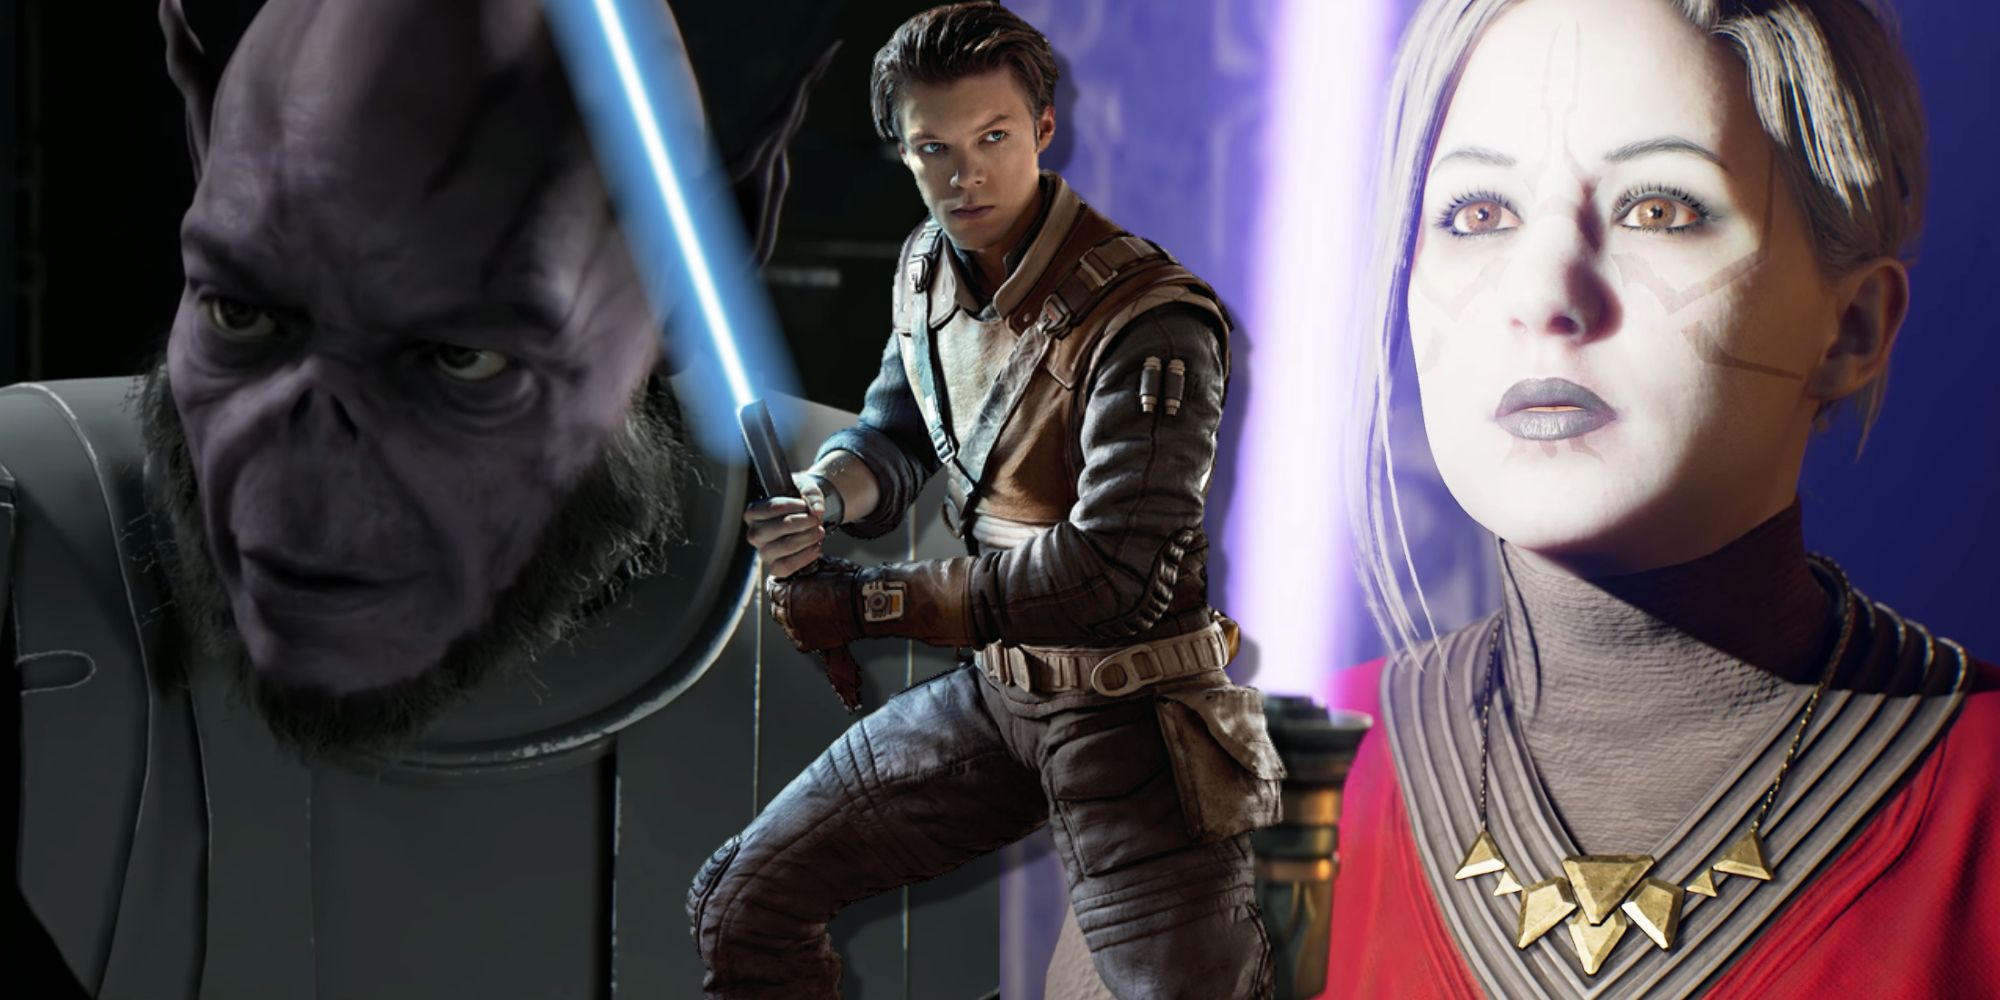 Star Wars Jedi Survivor Cast: Every Character and Voice Actor